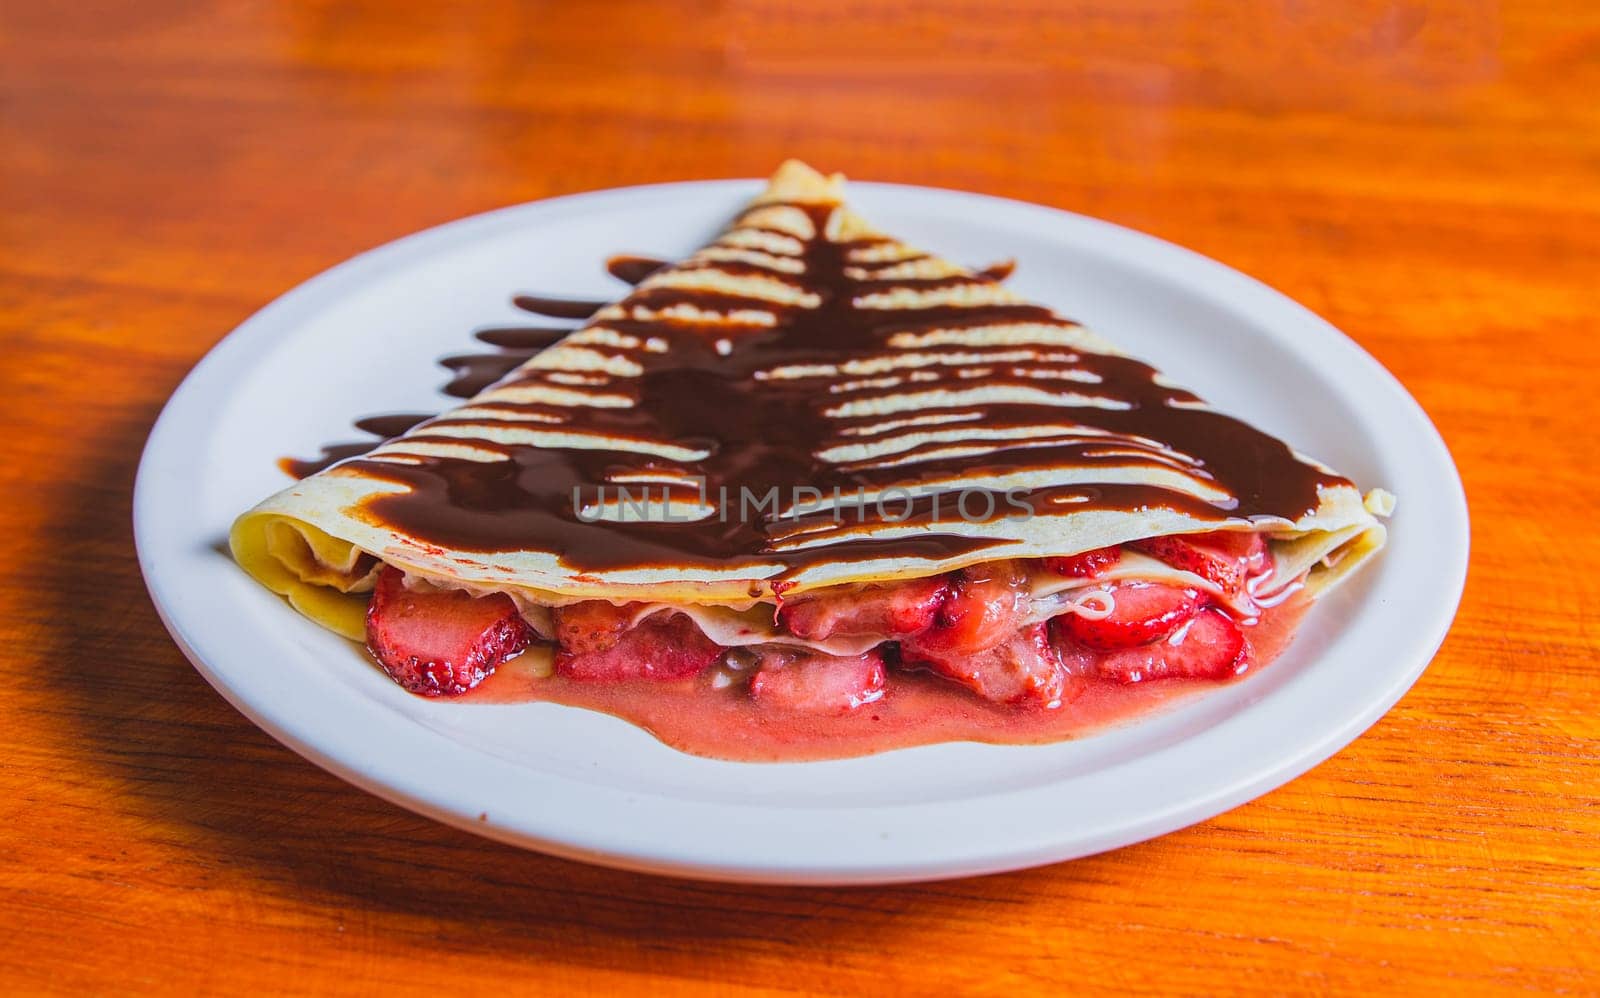 Close up of sweet strawberry crepe with chocolate cream on wooden table. Crepe with chocolate cream and strawberry on wooden table